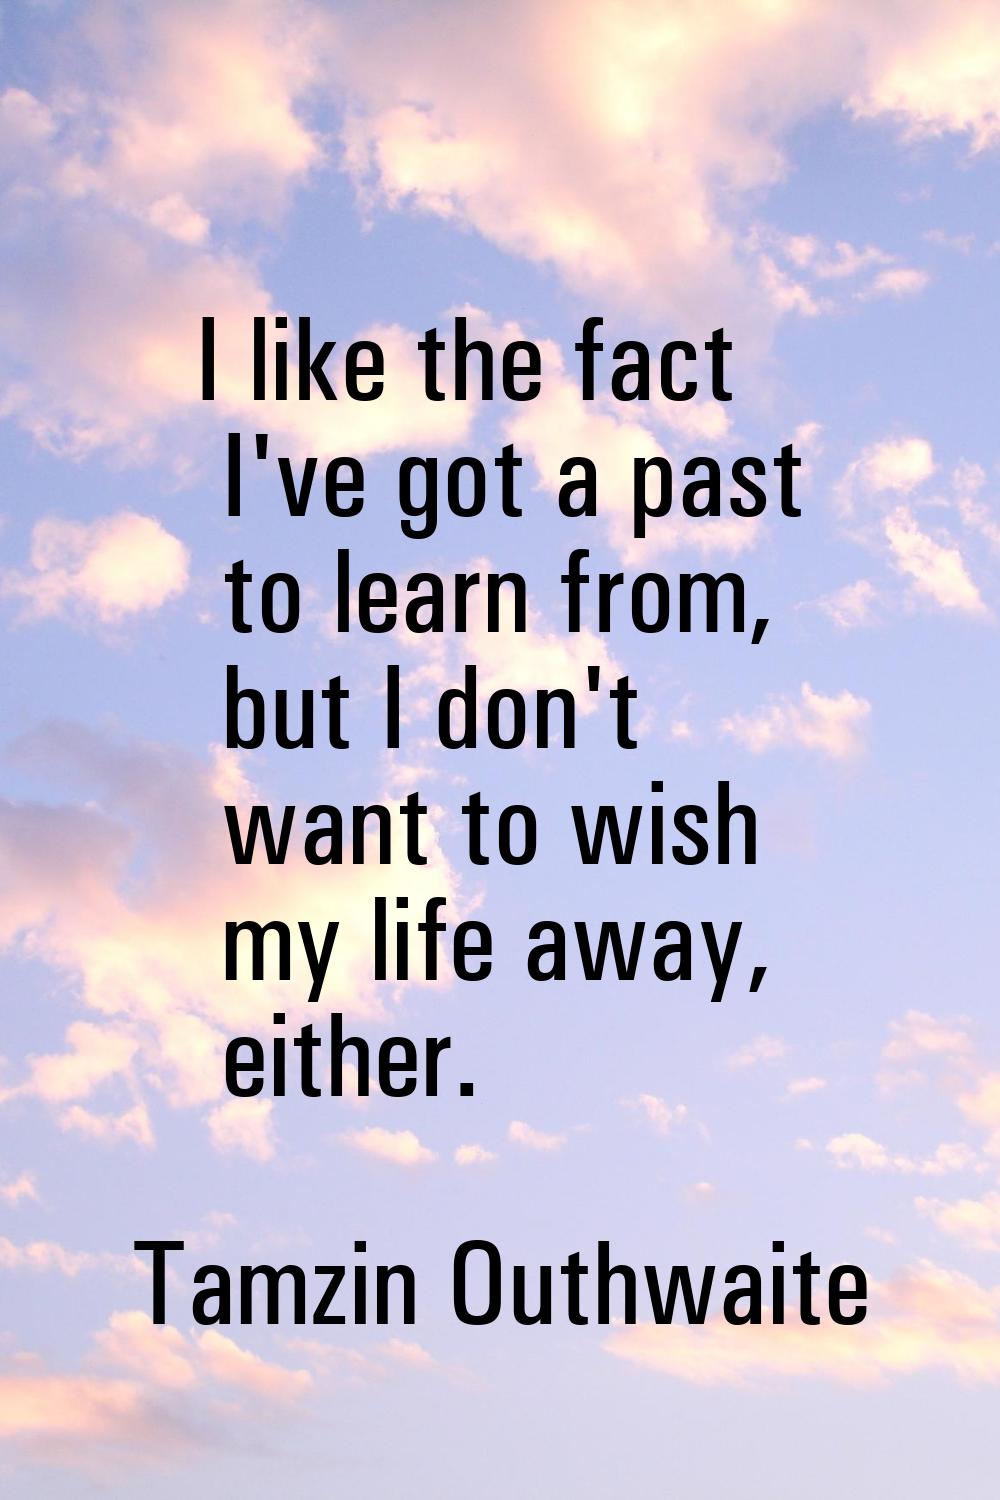 I like the fact I've got a past to learn from, but I don't want to wish my life away, either.